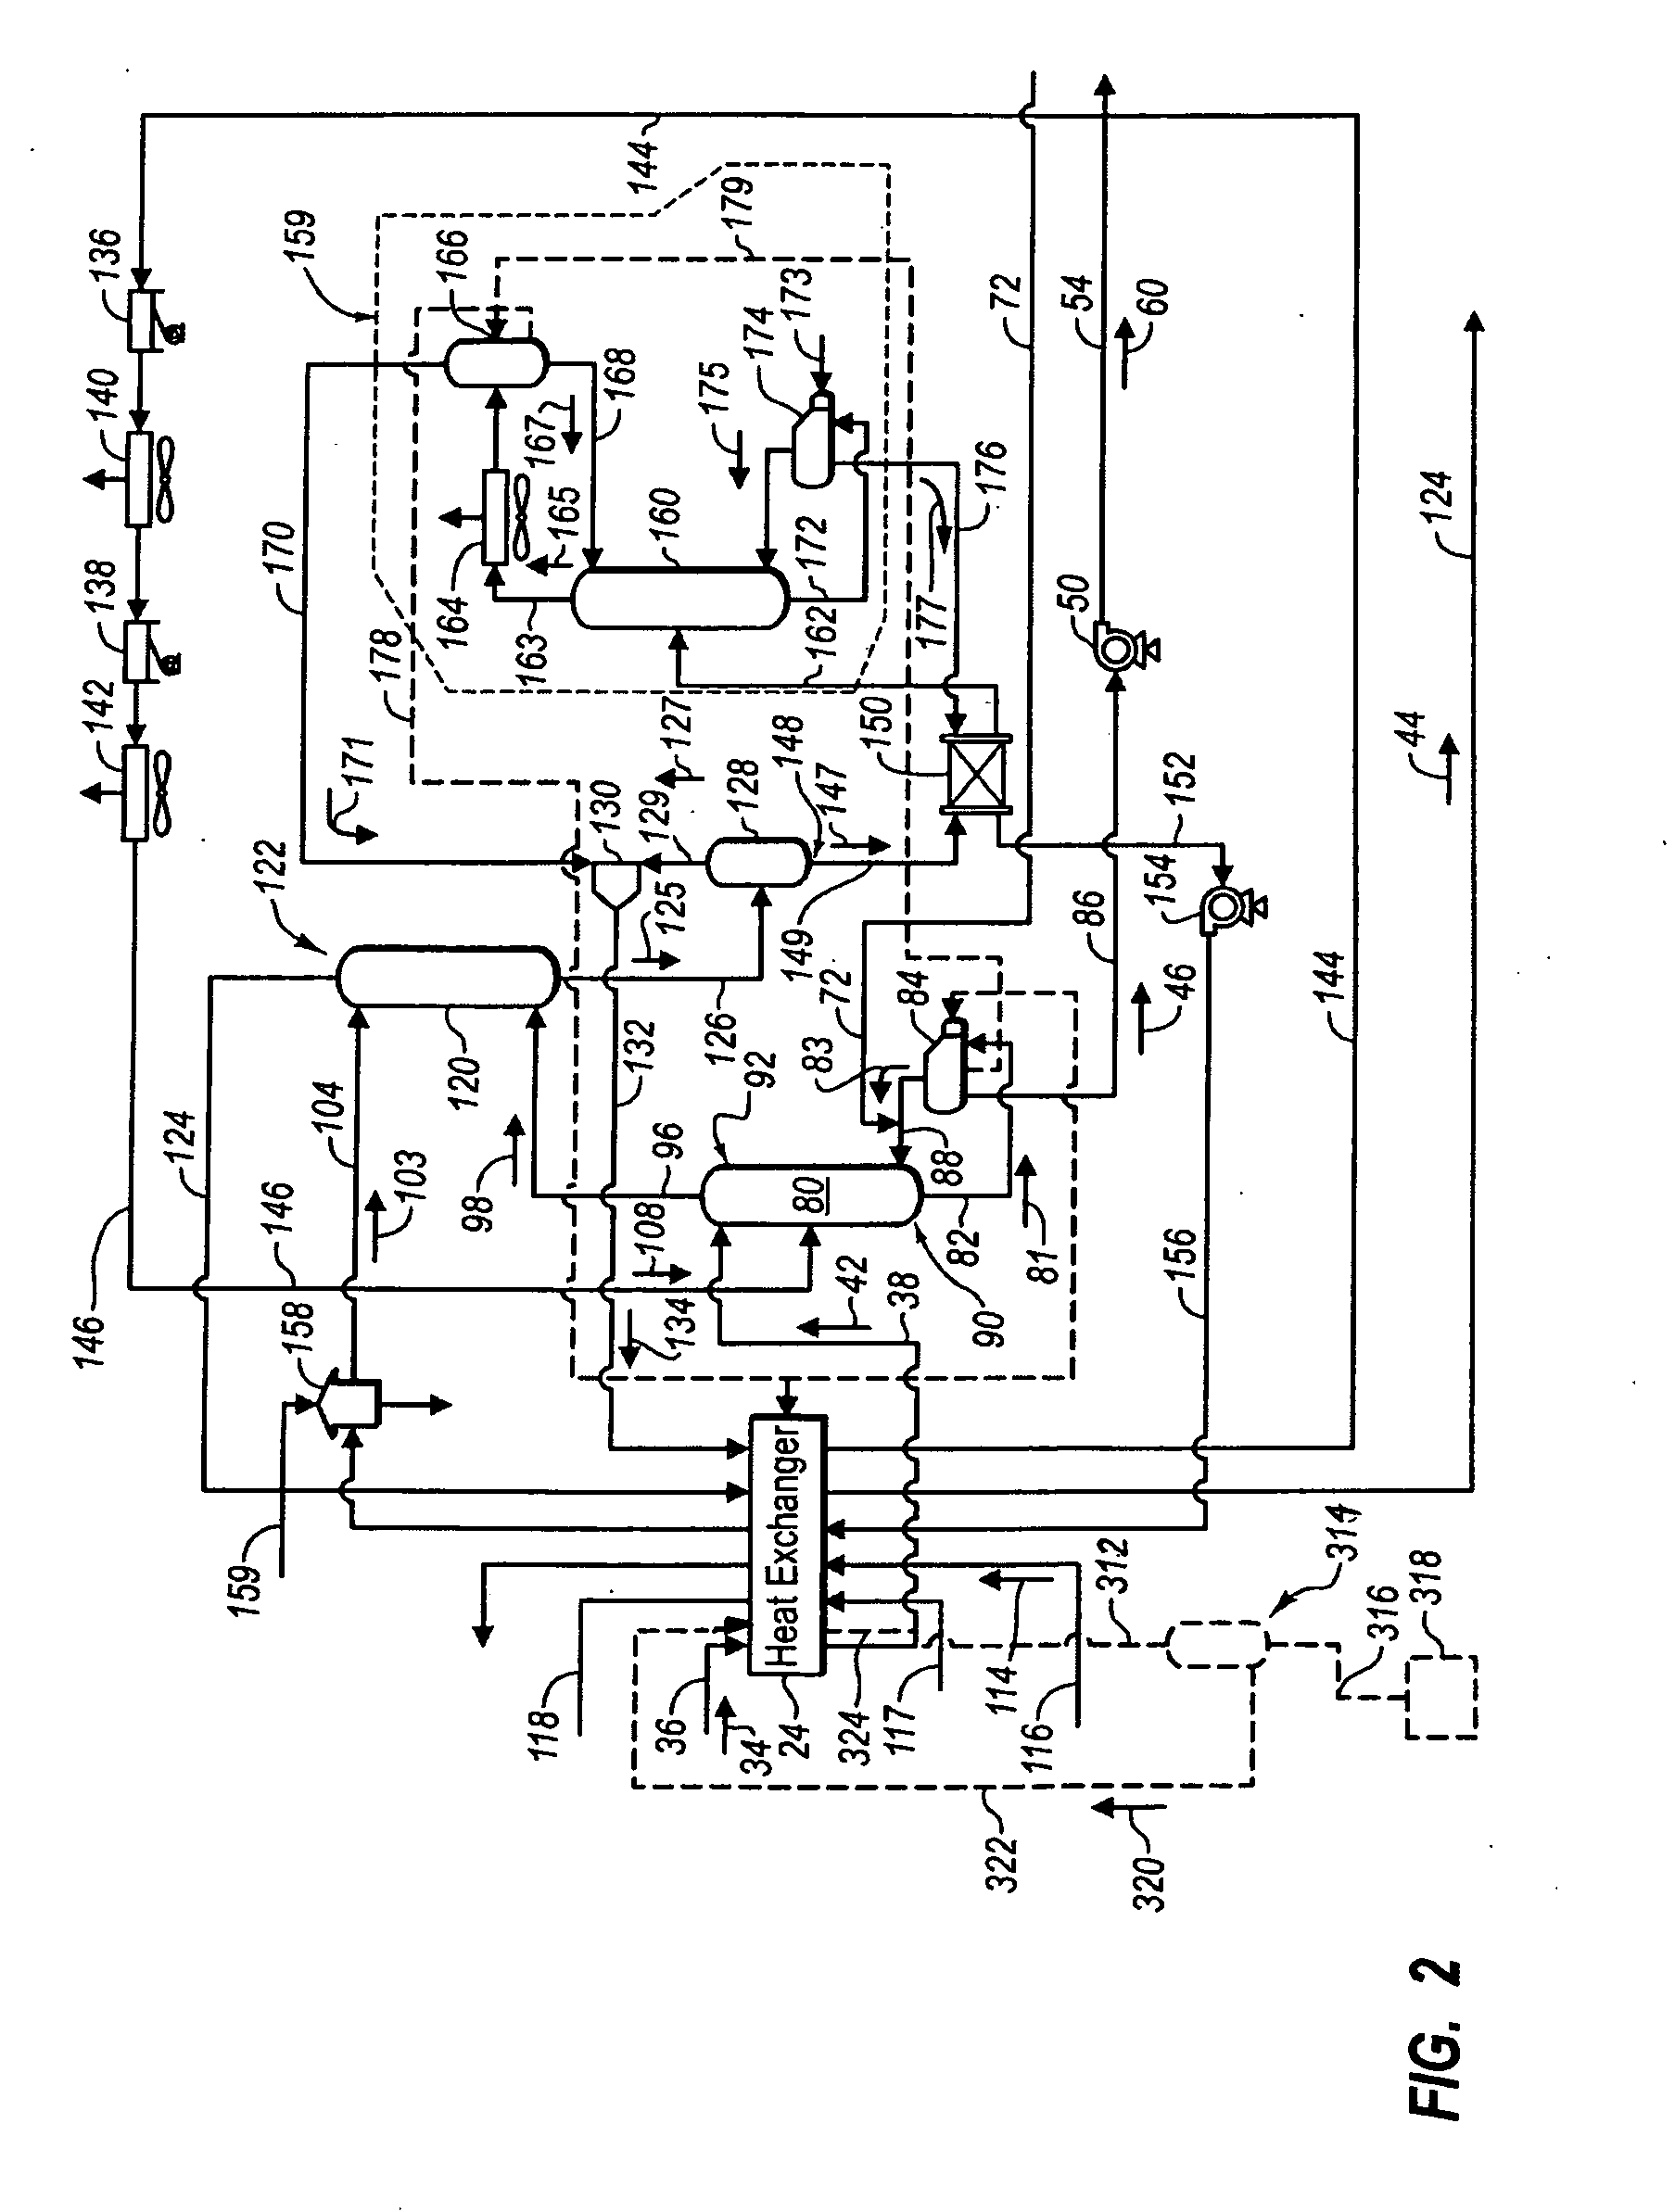 System for Separating a Waste Liquid from a Produced Gas and Injecting the Waste Liquid into a Well